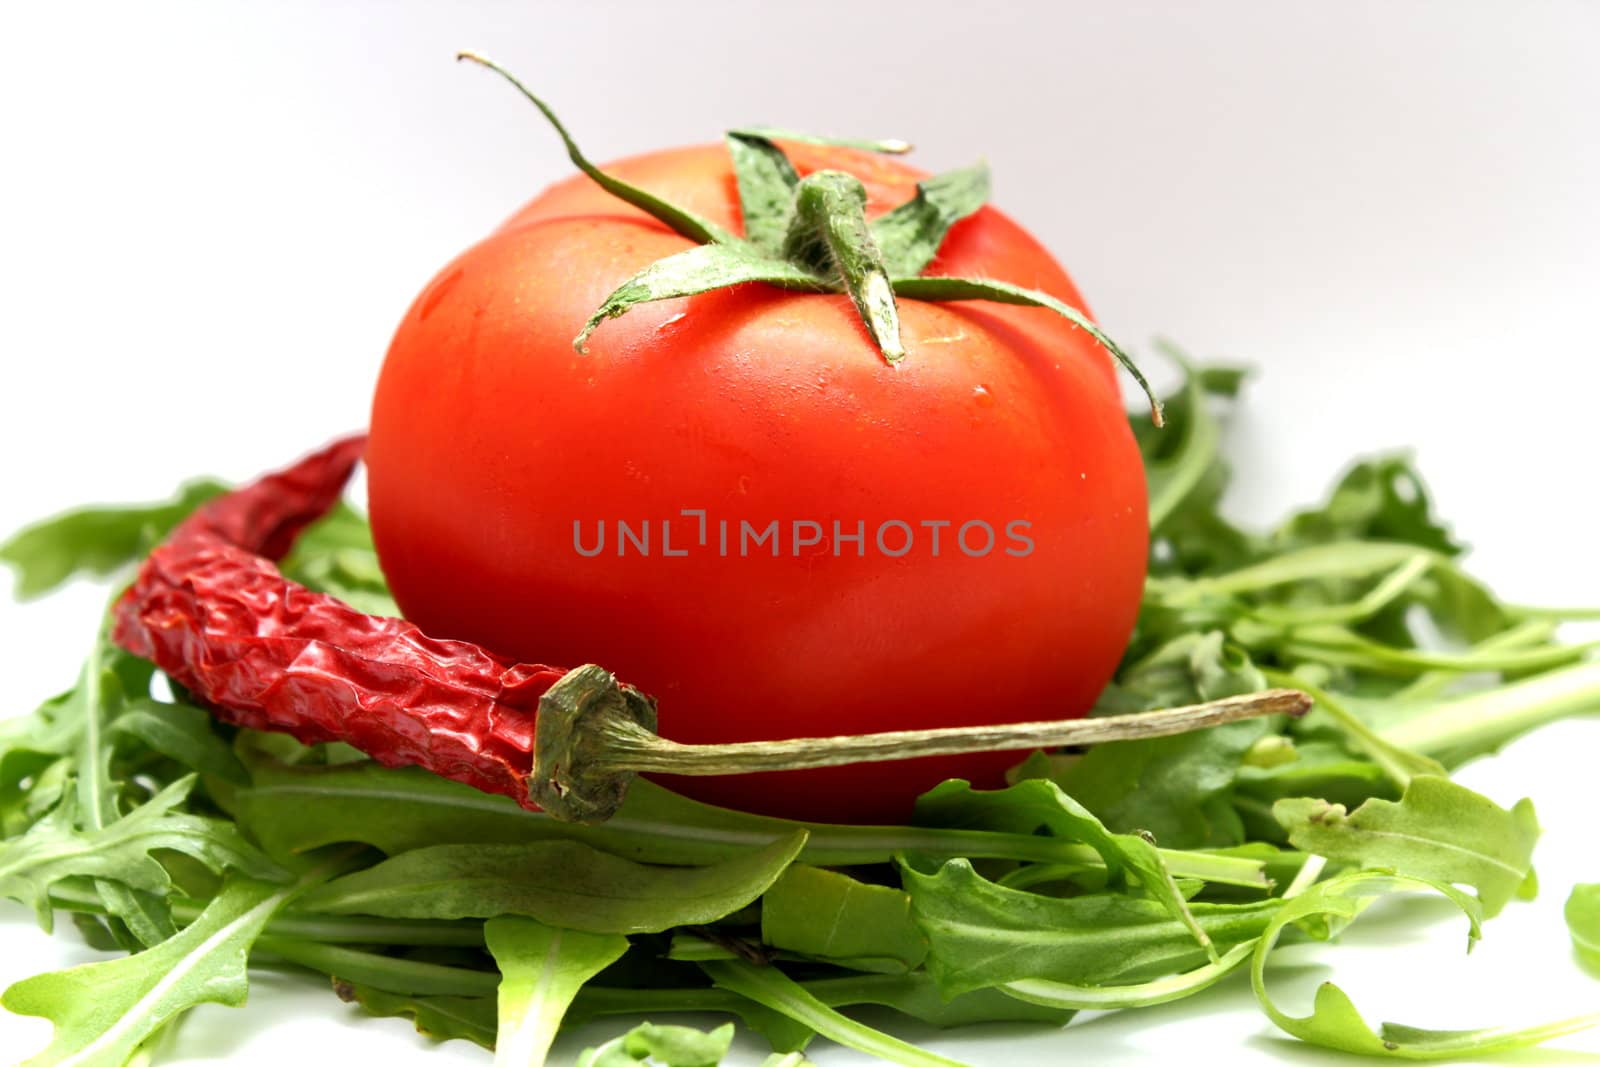 tomato on ruccola bed by taviphoto